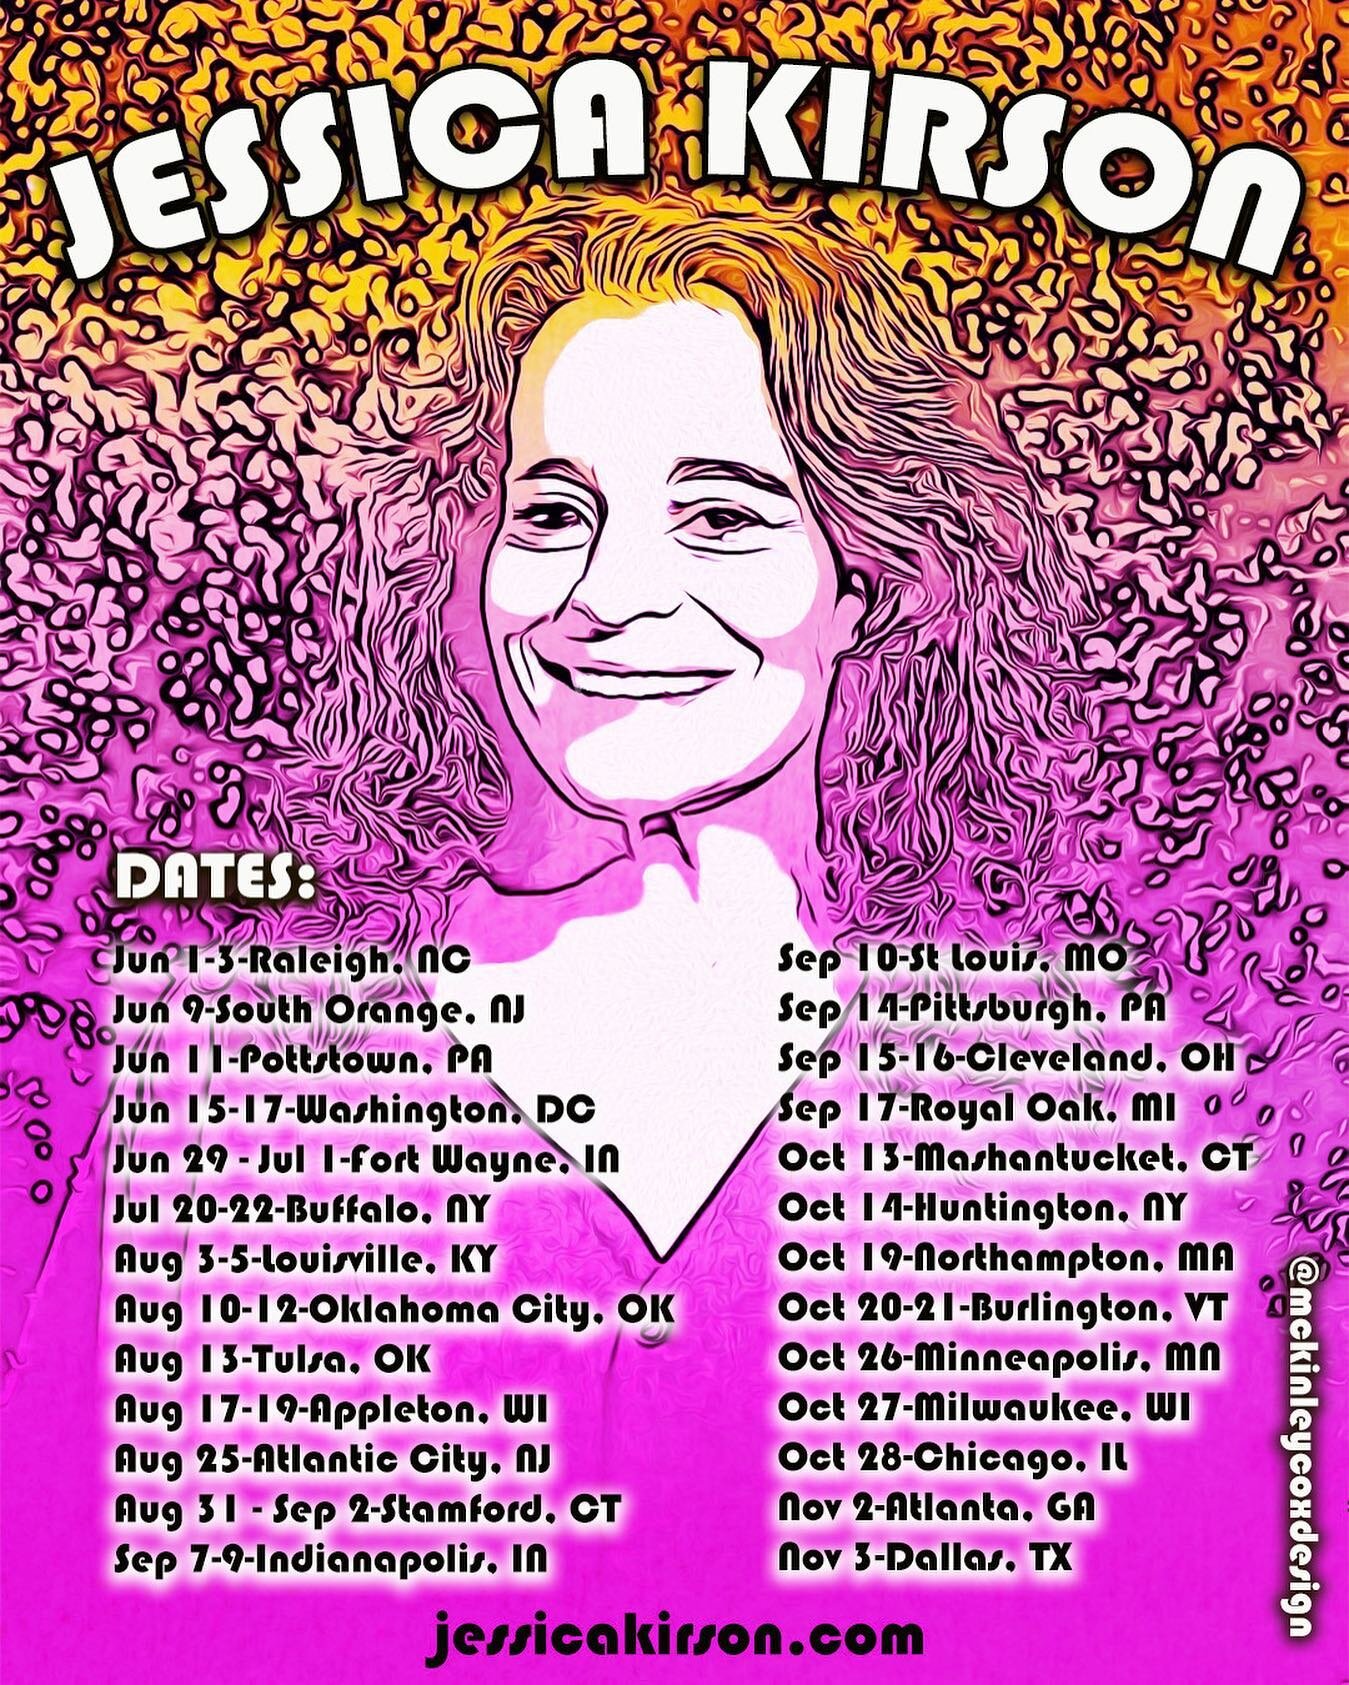 I am on tour!!! So many dates go on sale today!! All of these cities have sent requests for me to come there so nows your chance to get your tickets!! JessicaKirson.com ❤️❤️❤️

Poster by @mckinleycoxdesign